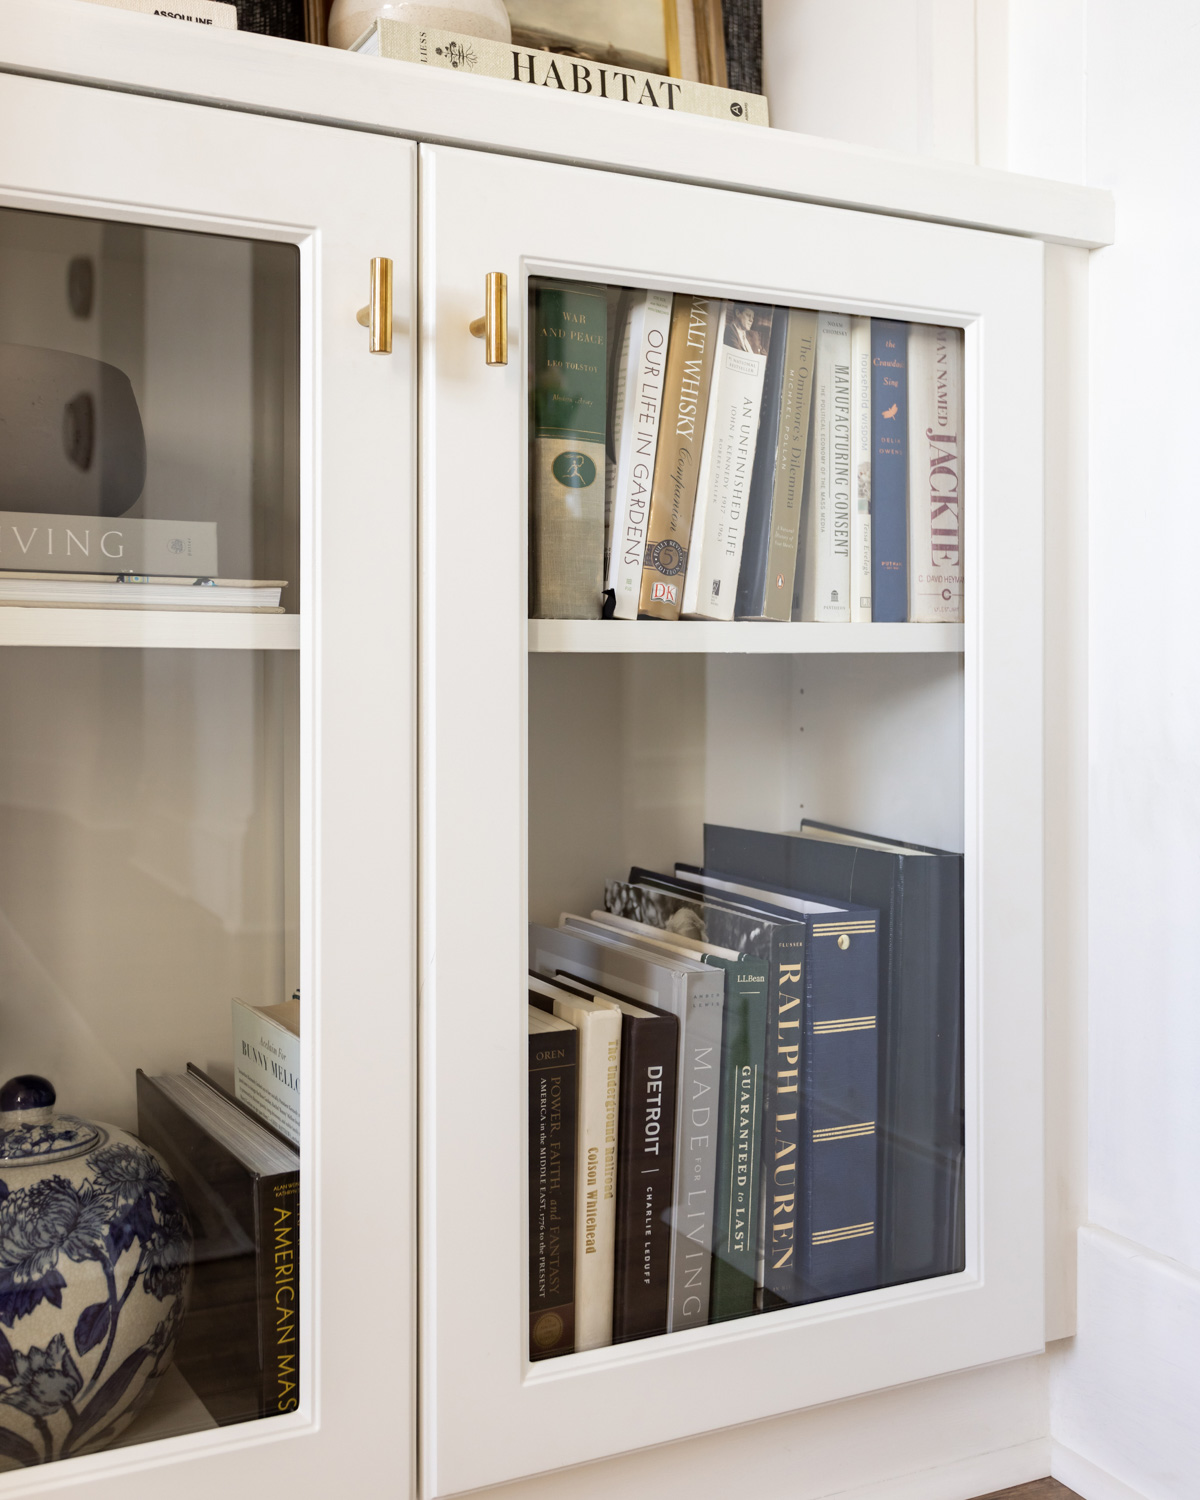 Mixing new and old books on a built-in bookcase.